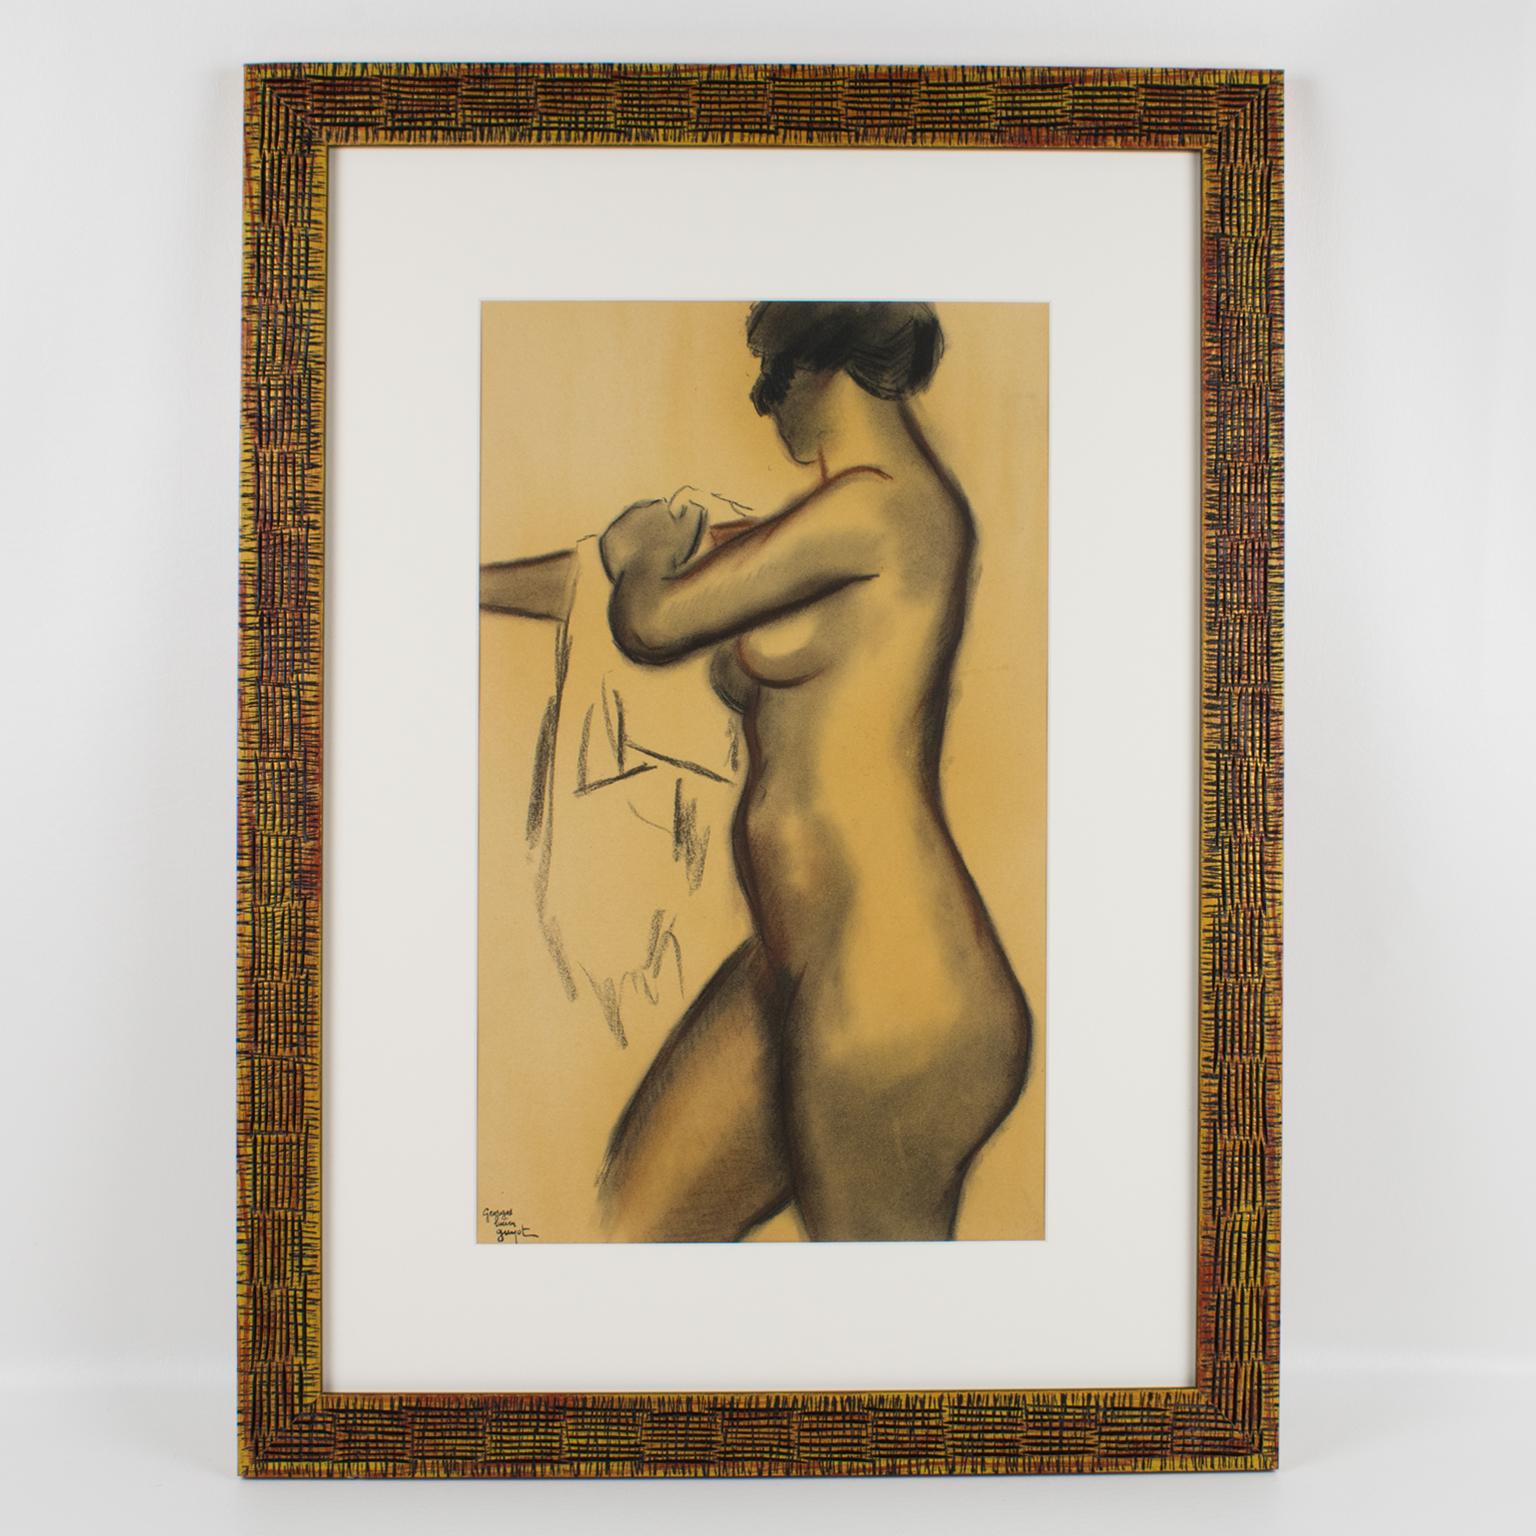 French artist Georges Lucien Guyot (1885 - 1972) signed this charming woman nude study.
This painting features a lovely design of a woman getting out of the bath and wiping with a towel. Only a few lines in charcoal and red chalk or sanguine mark